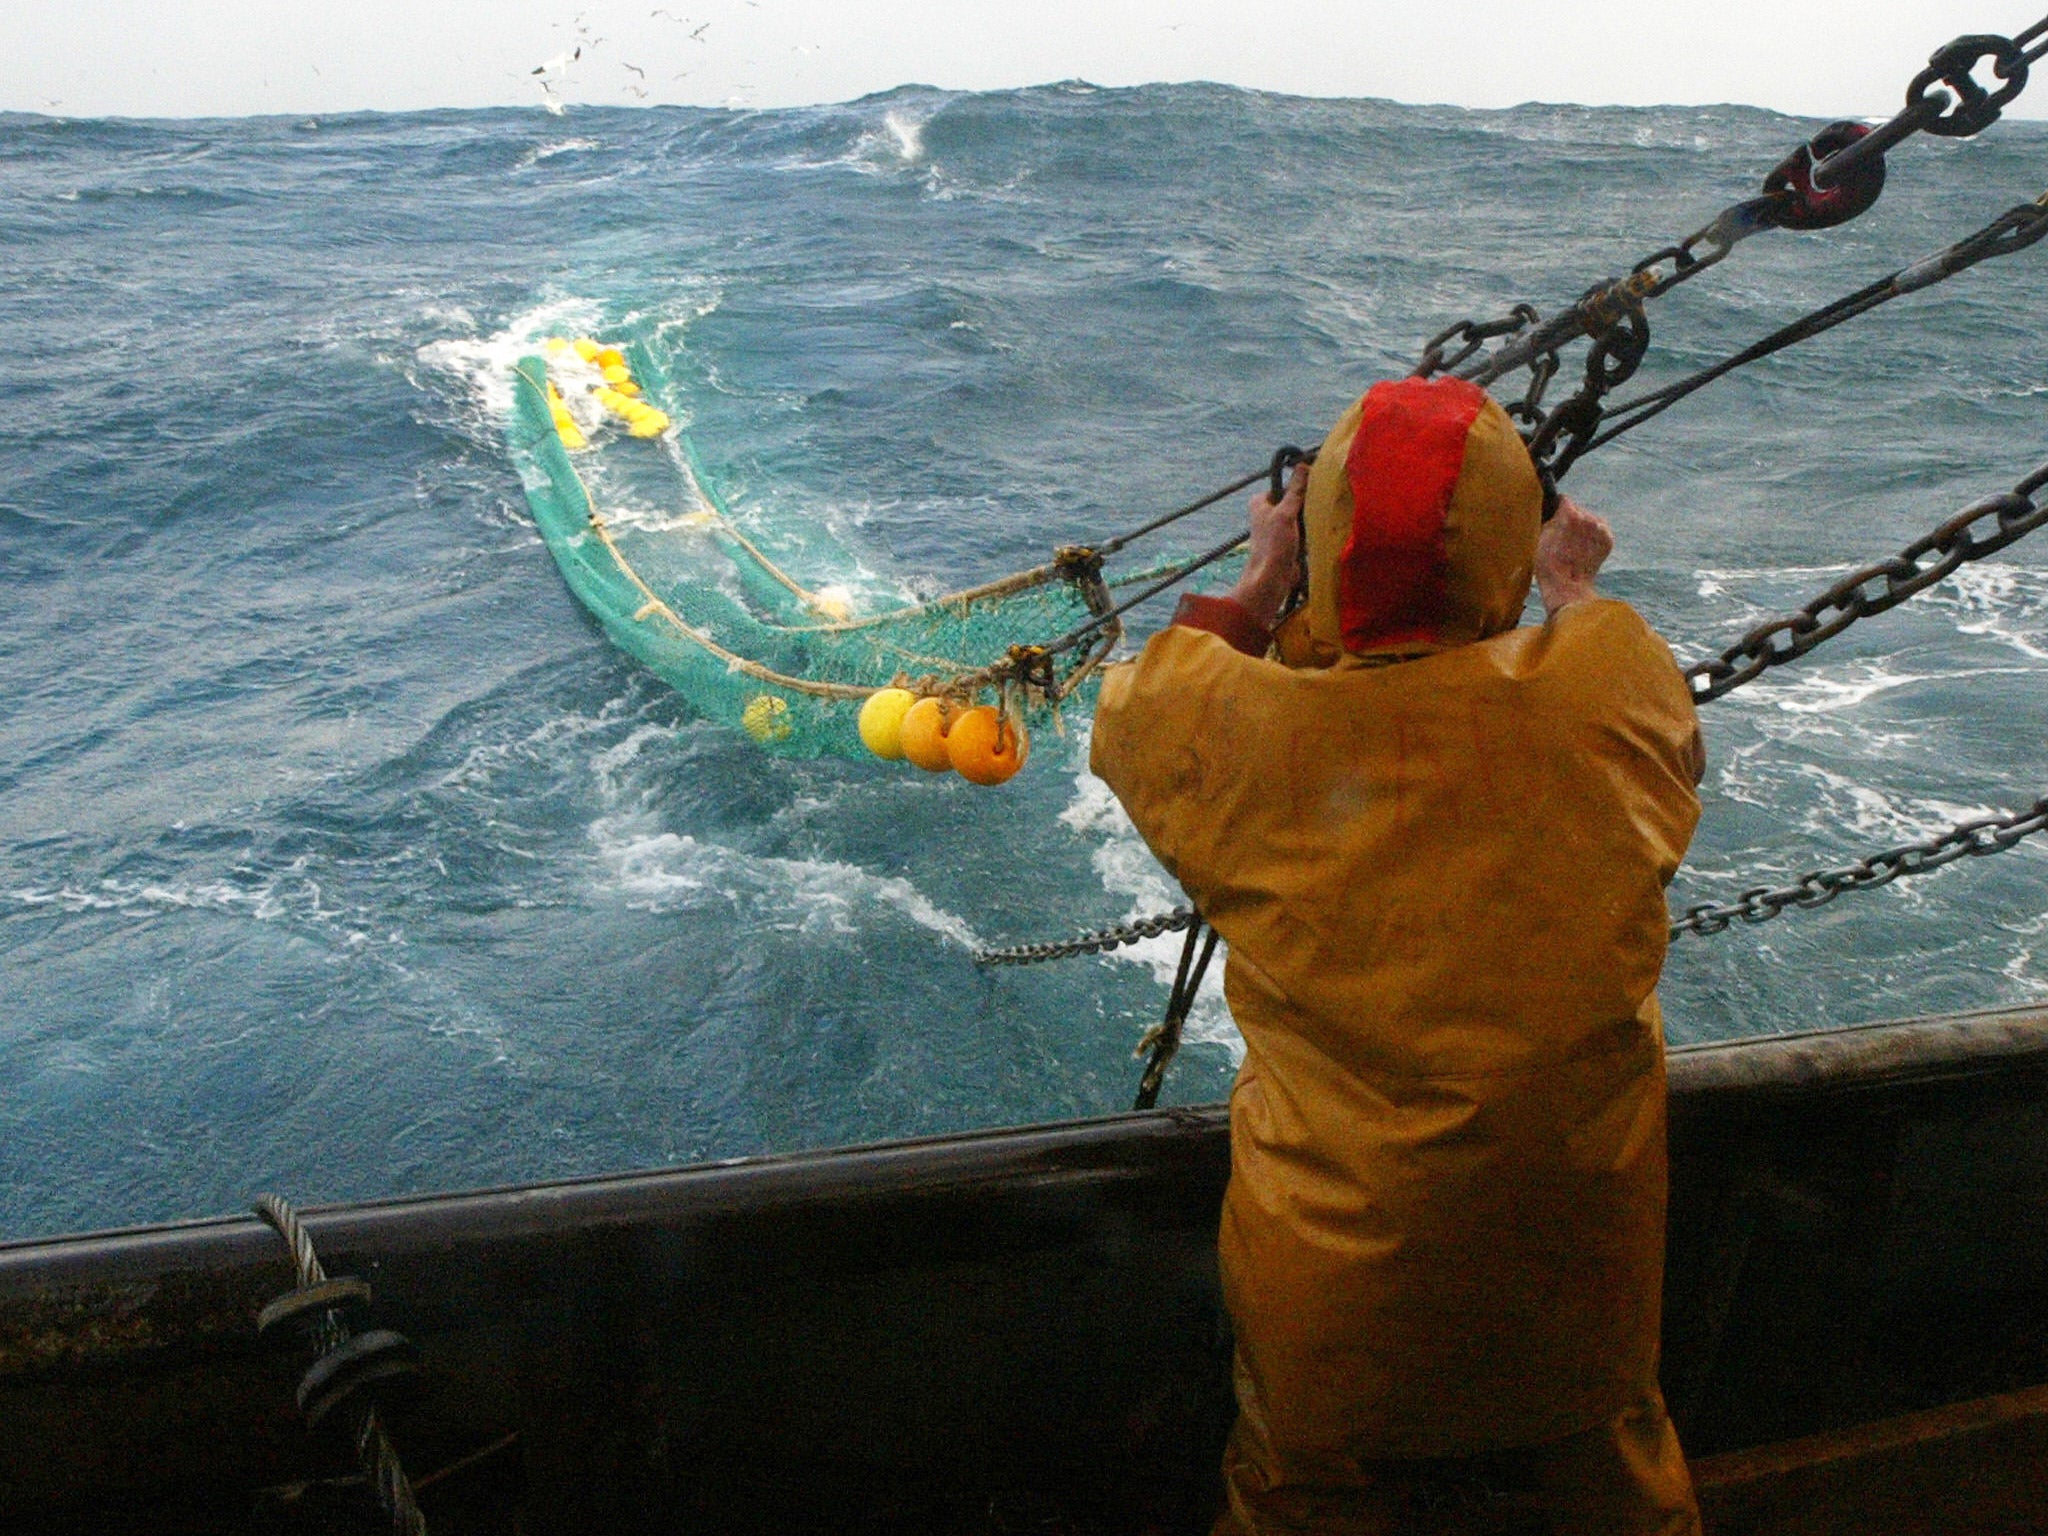 Pulse fishing’s electric shocks force commercially valuable bottom-dwelling fish and seafood up from the seabed into the water column